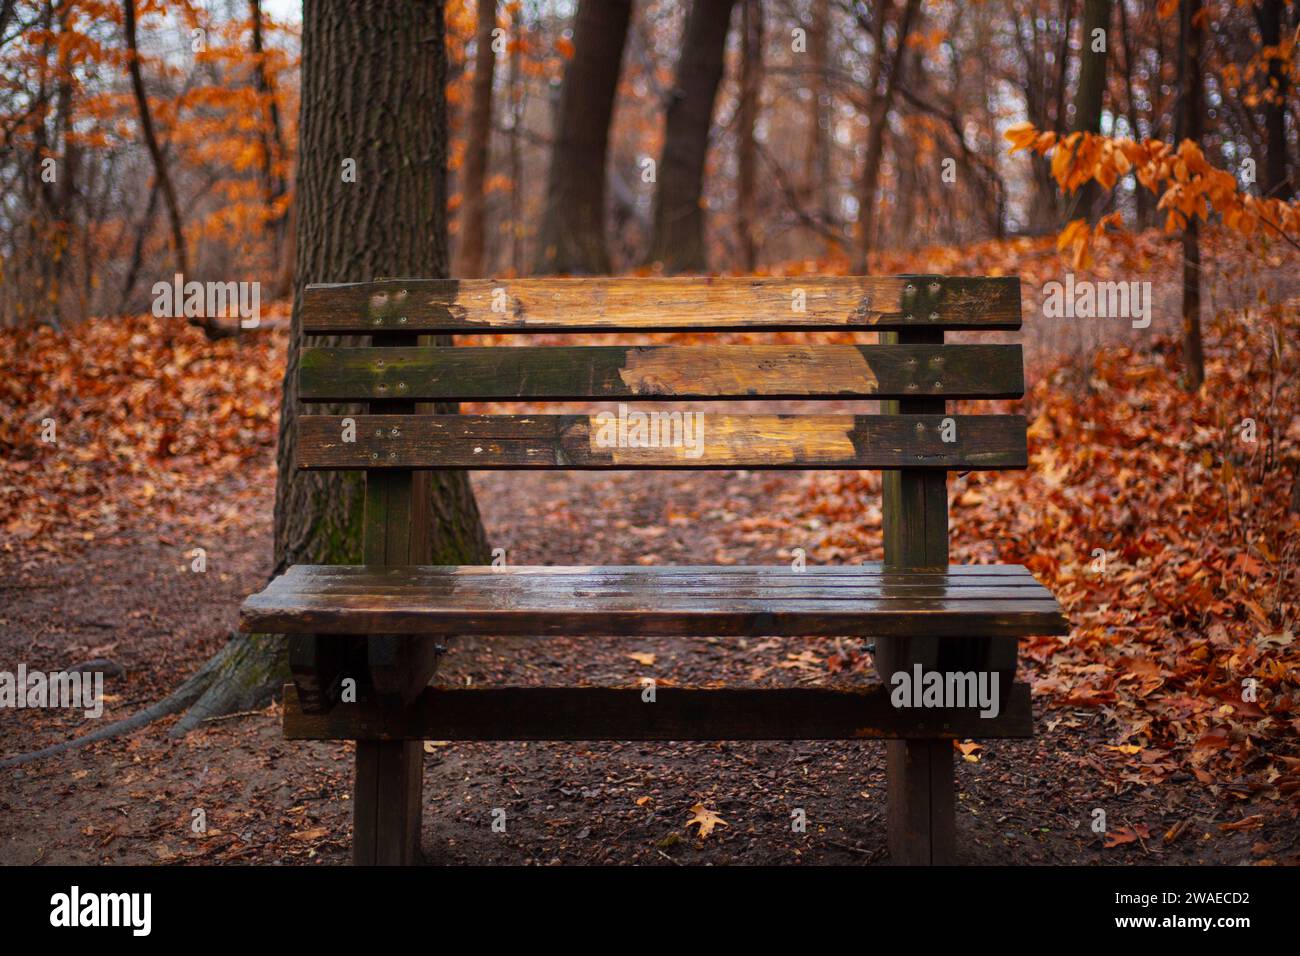 A wooden park bench in the middle of a blanket of fallen leaves, surrounded by tall trees Stock Photo